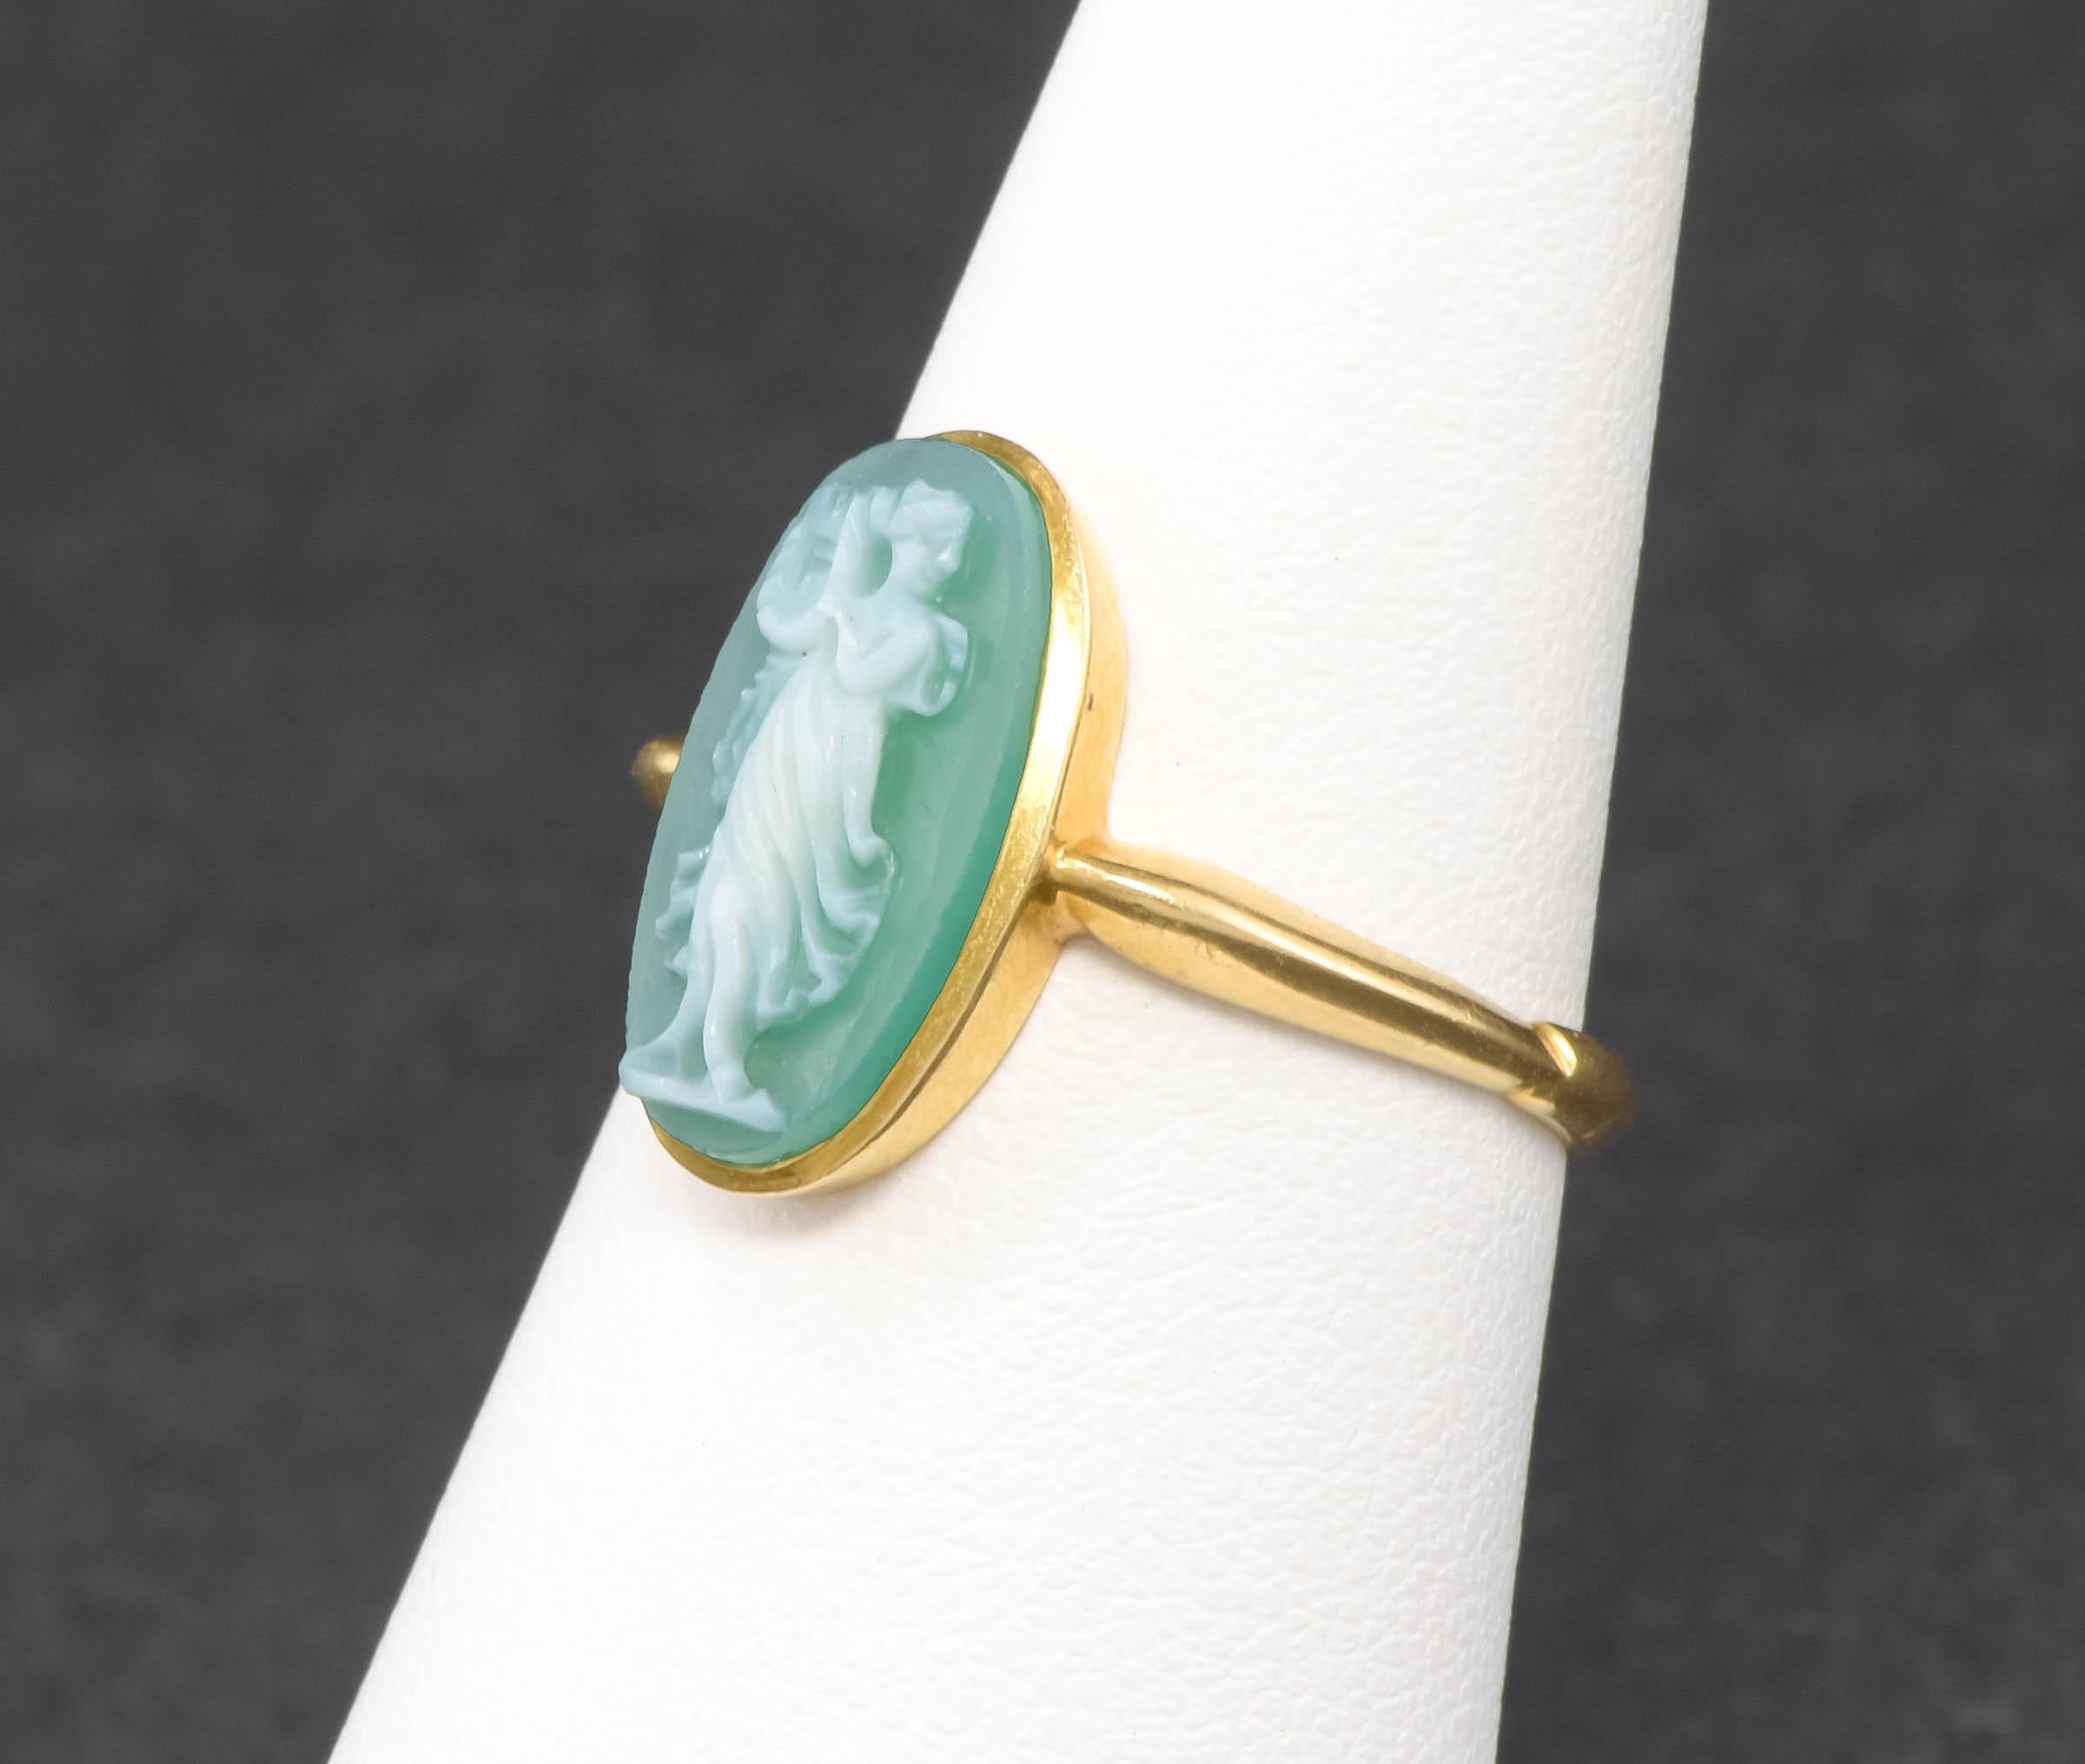 Carved Green Chalcedony Cameo Ring in 18K Gold, Hallmarked Chester 1909 2